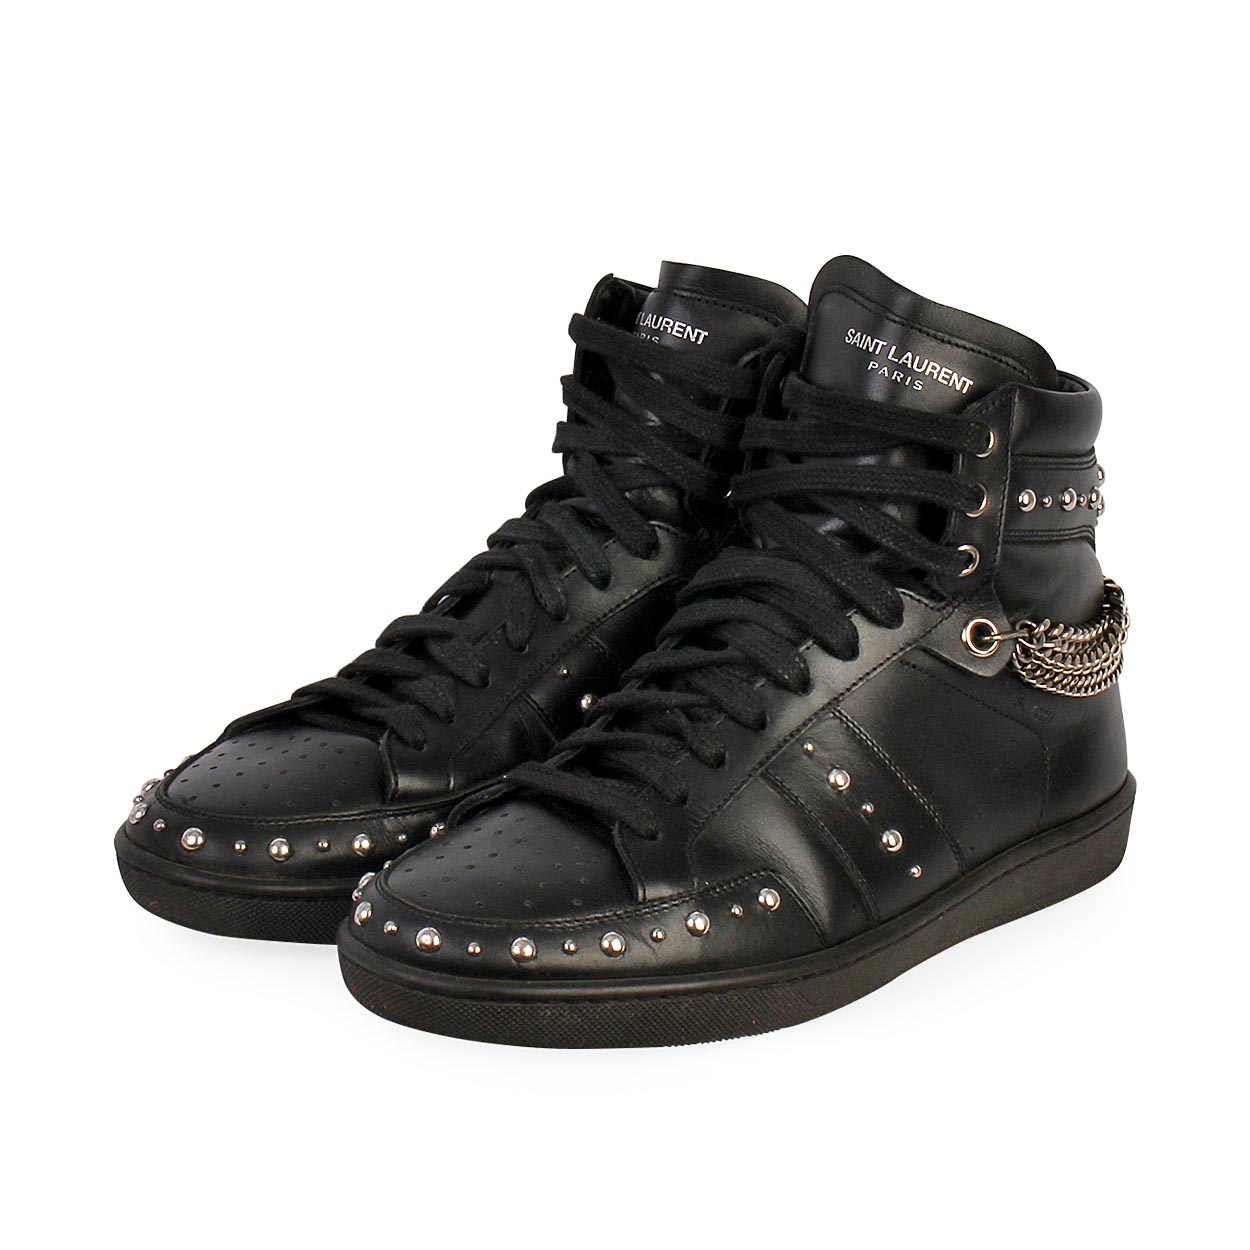 SAINT LAURENT Leather Studded High-Top SL/22H Sneakers Black - S: 39 (6 ...